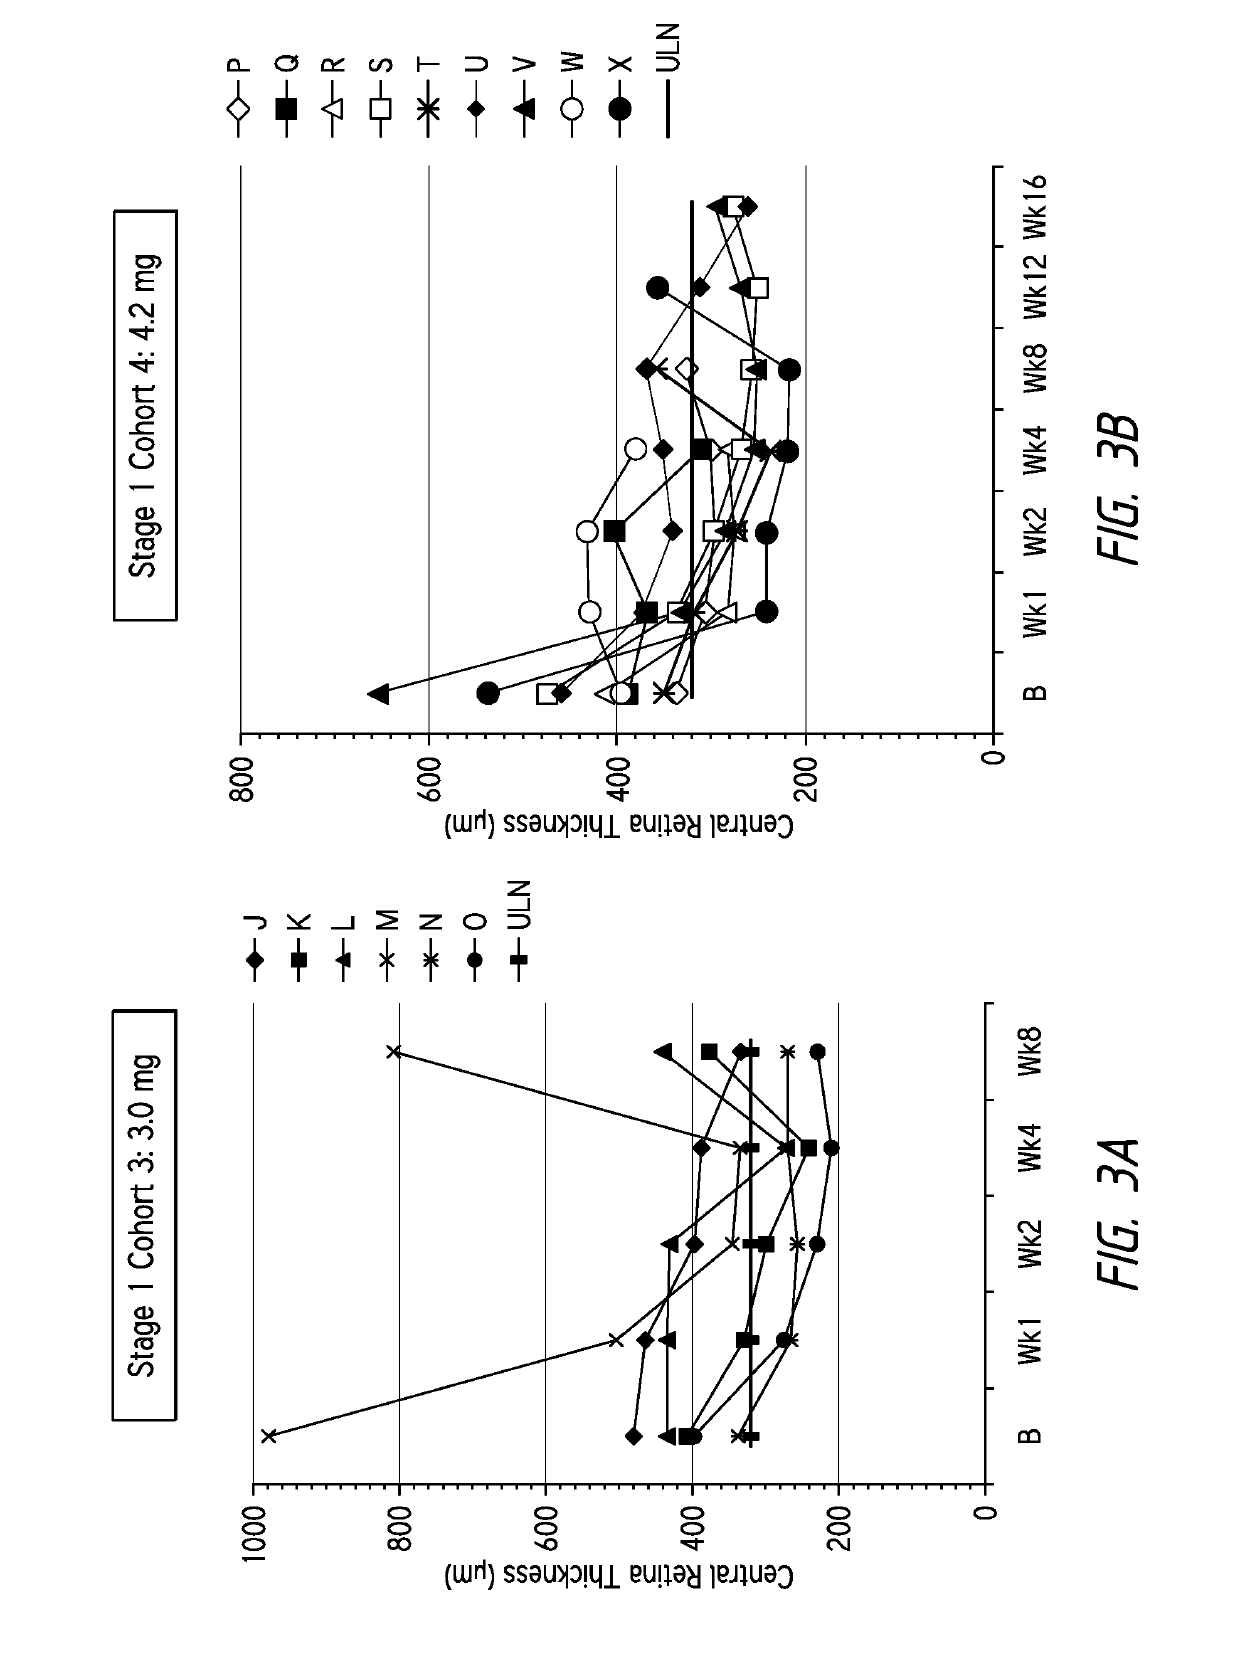 Method of treating AMD in patients refractory to anti-VEGF therapy